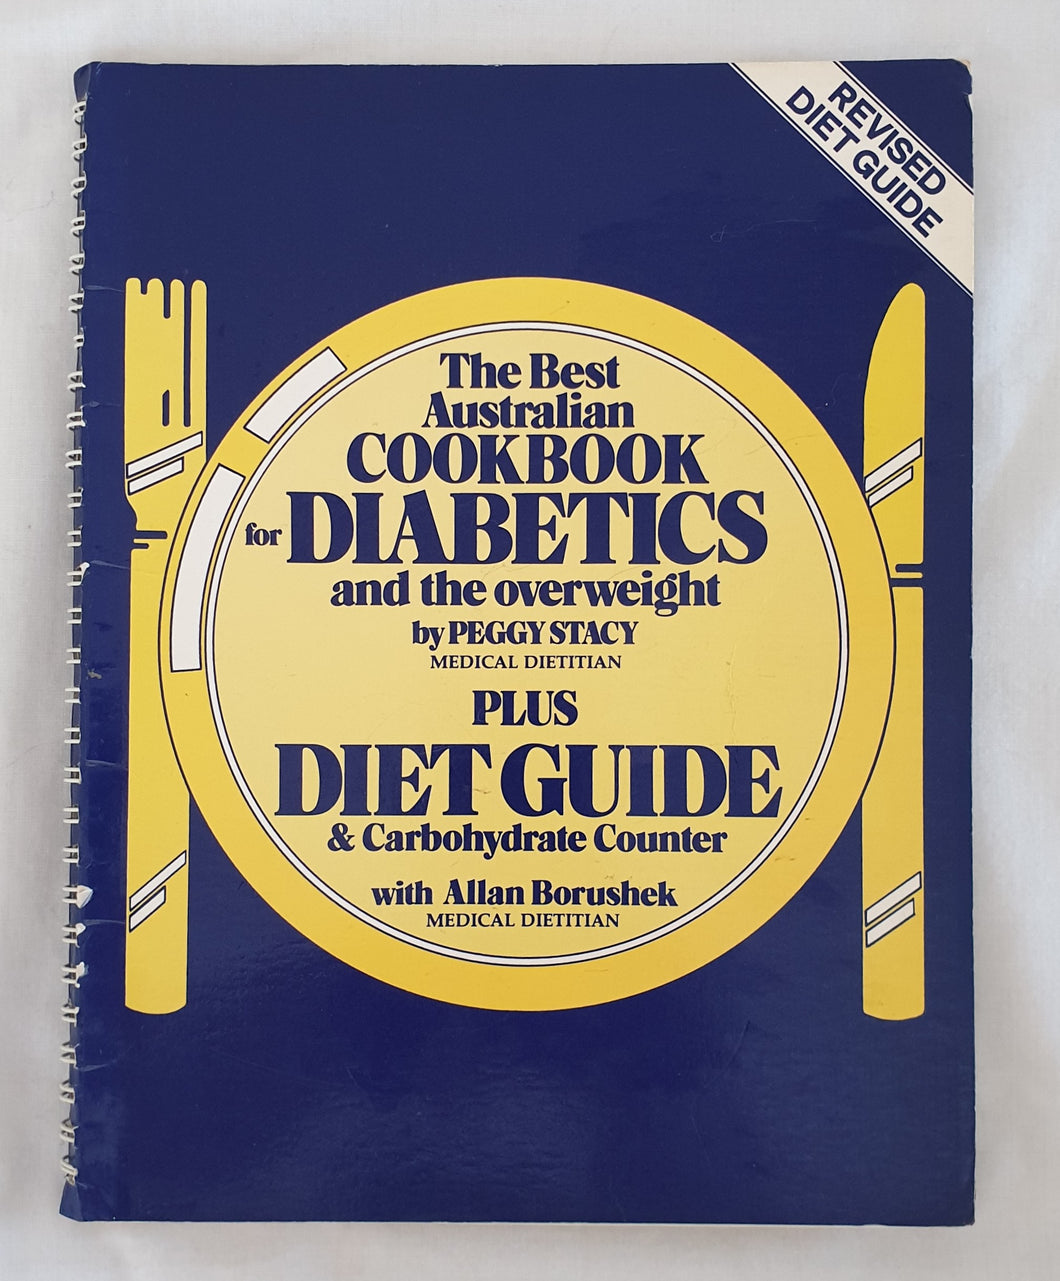 The Best Australian Cookbook for Diabetics and the Overweight by Peggy Stacy